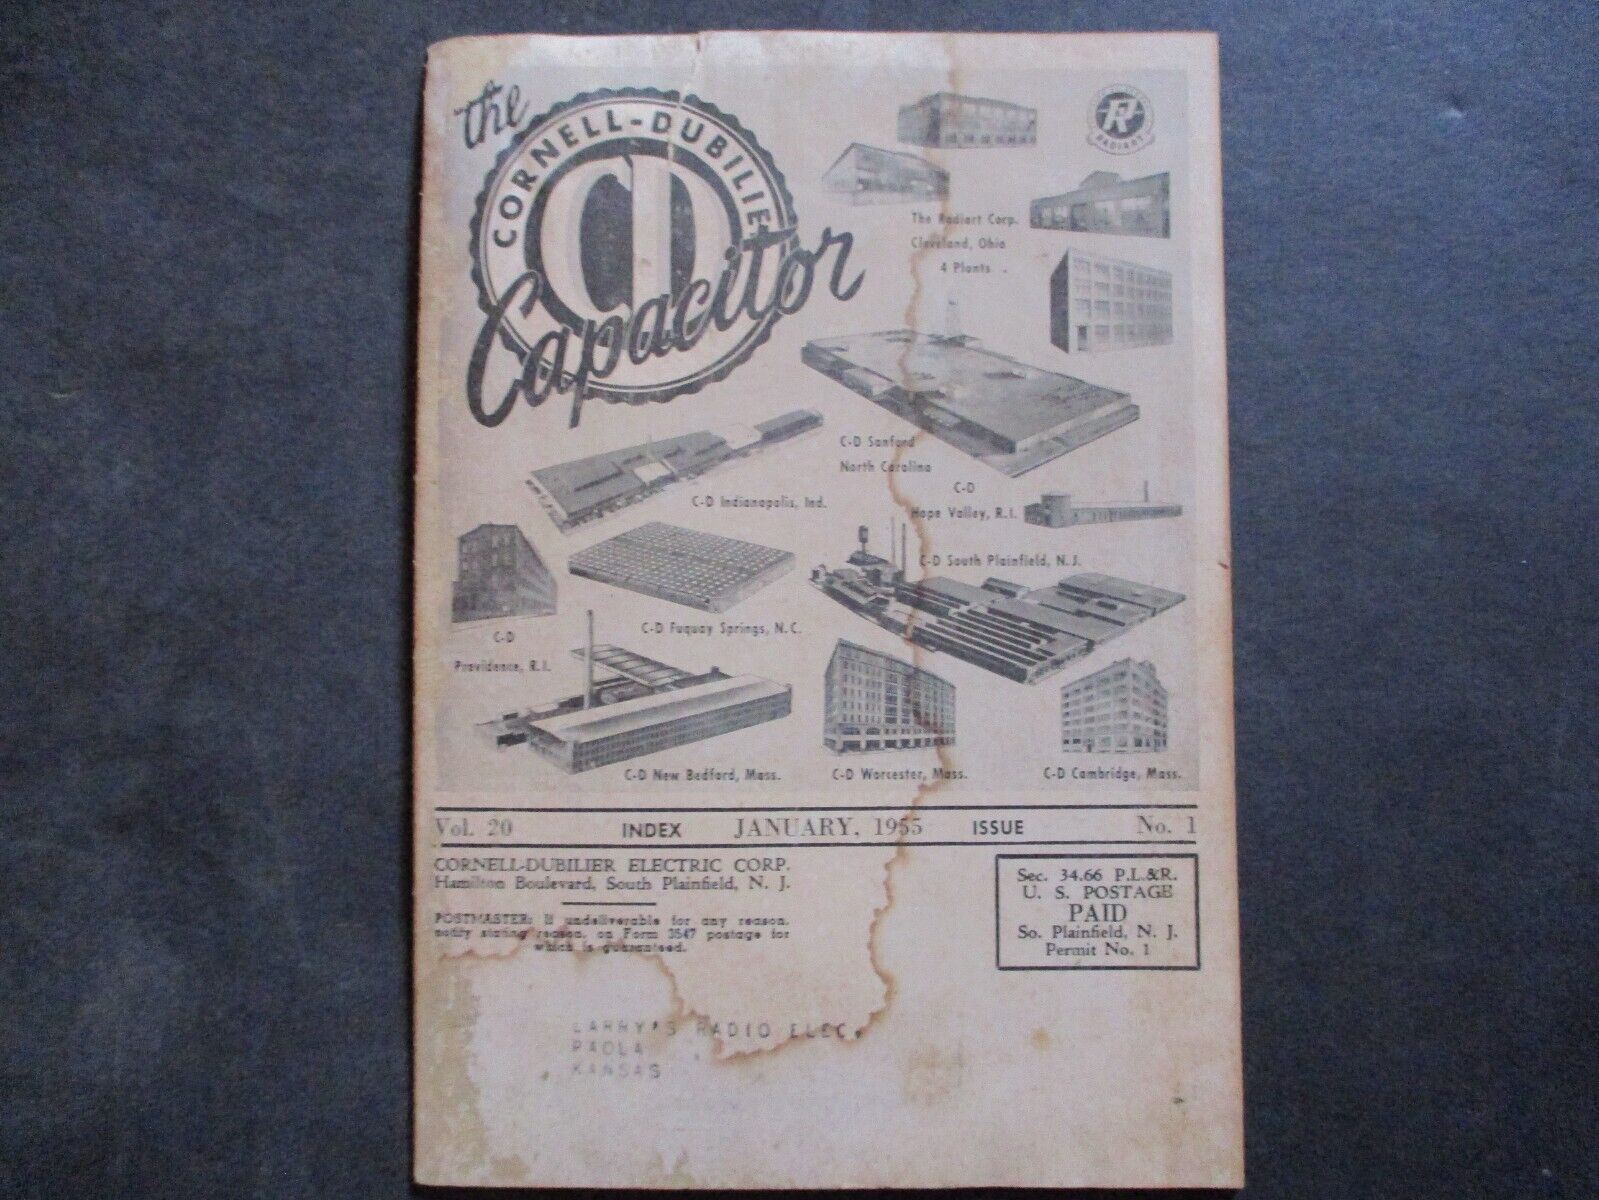 January, 1955 The Cornell-Dubilier Capacitor Vol. 20 No. 1 guide